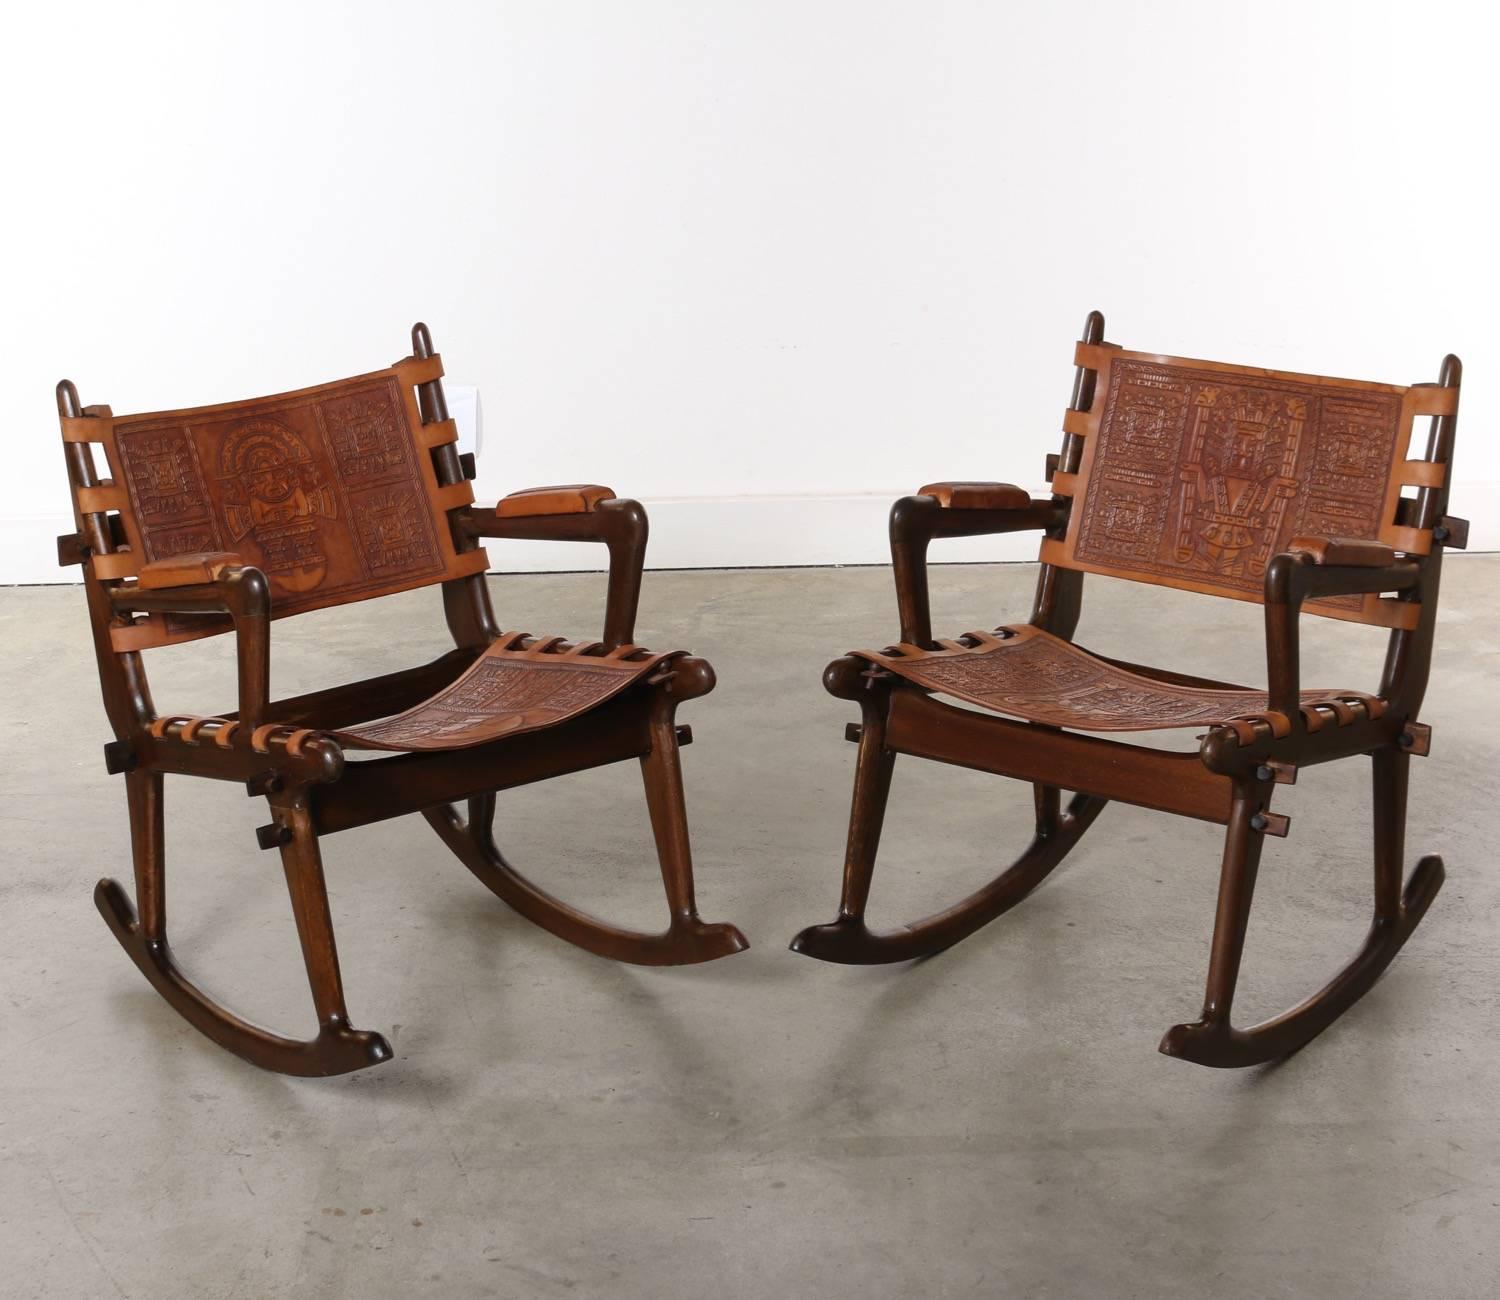 These fabulous wood and leather 1960s rocking chairs are held together by wooden dowels and are readily flat packed. The leather is in fabulous condition with tooled Aztec motif and great patina. The frames have the perfect amount of wear to give